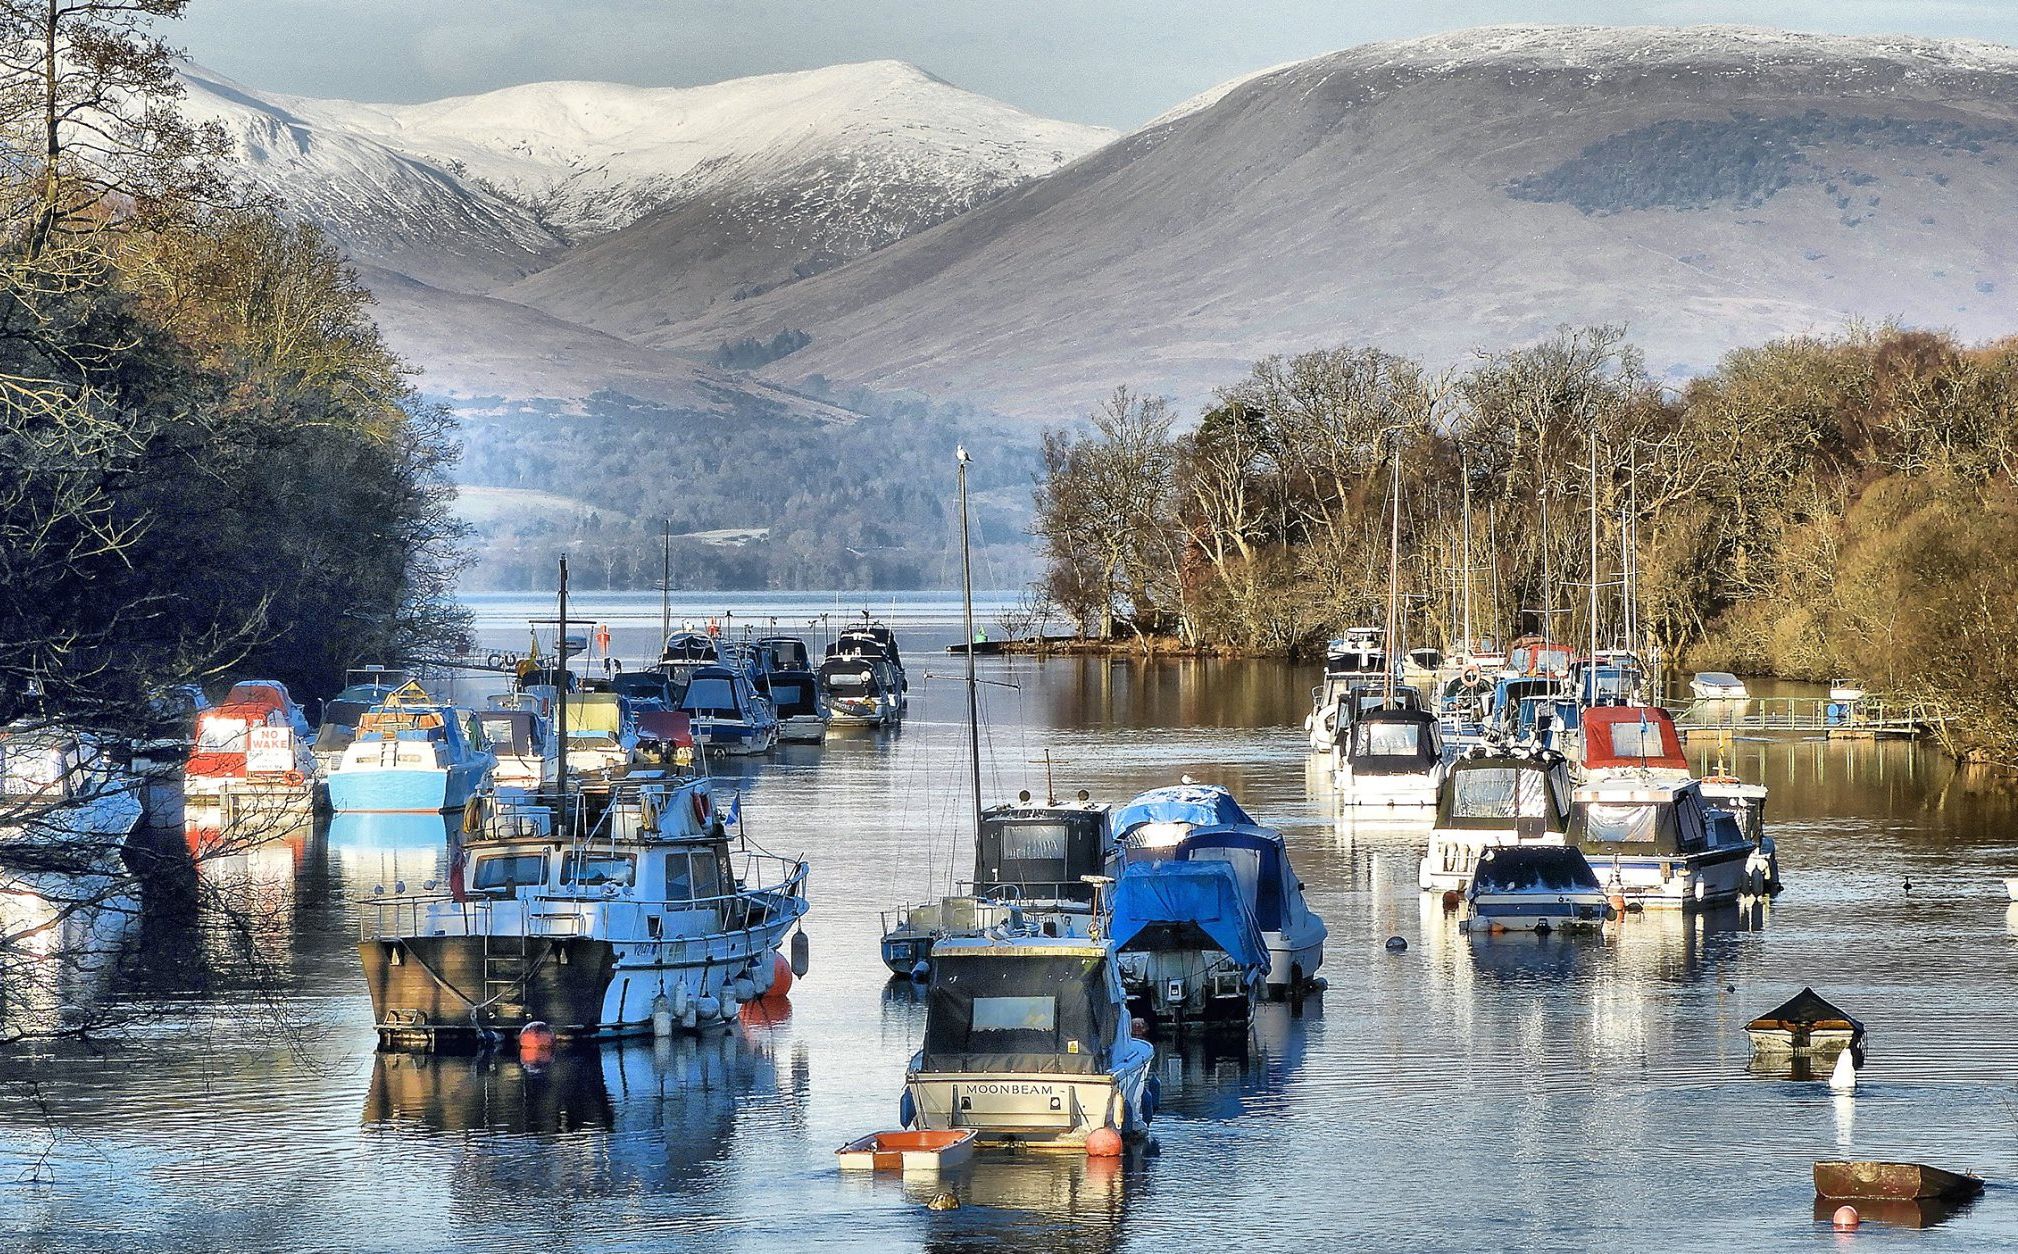 Boats in River Leven at Balloch